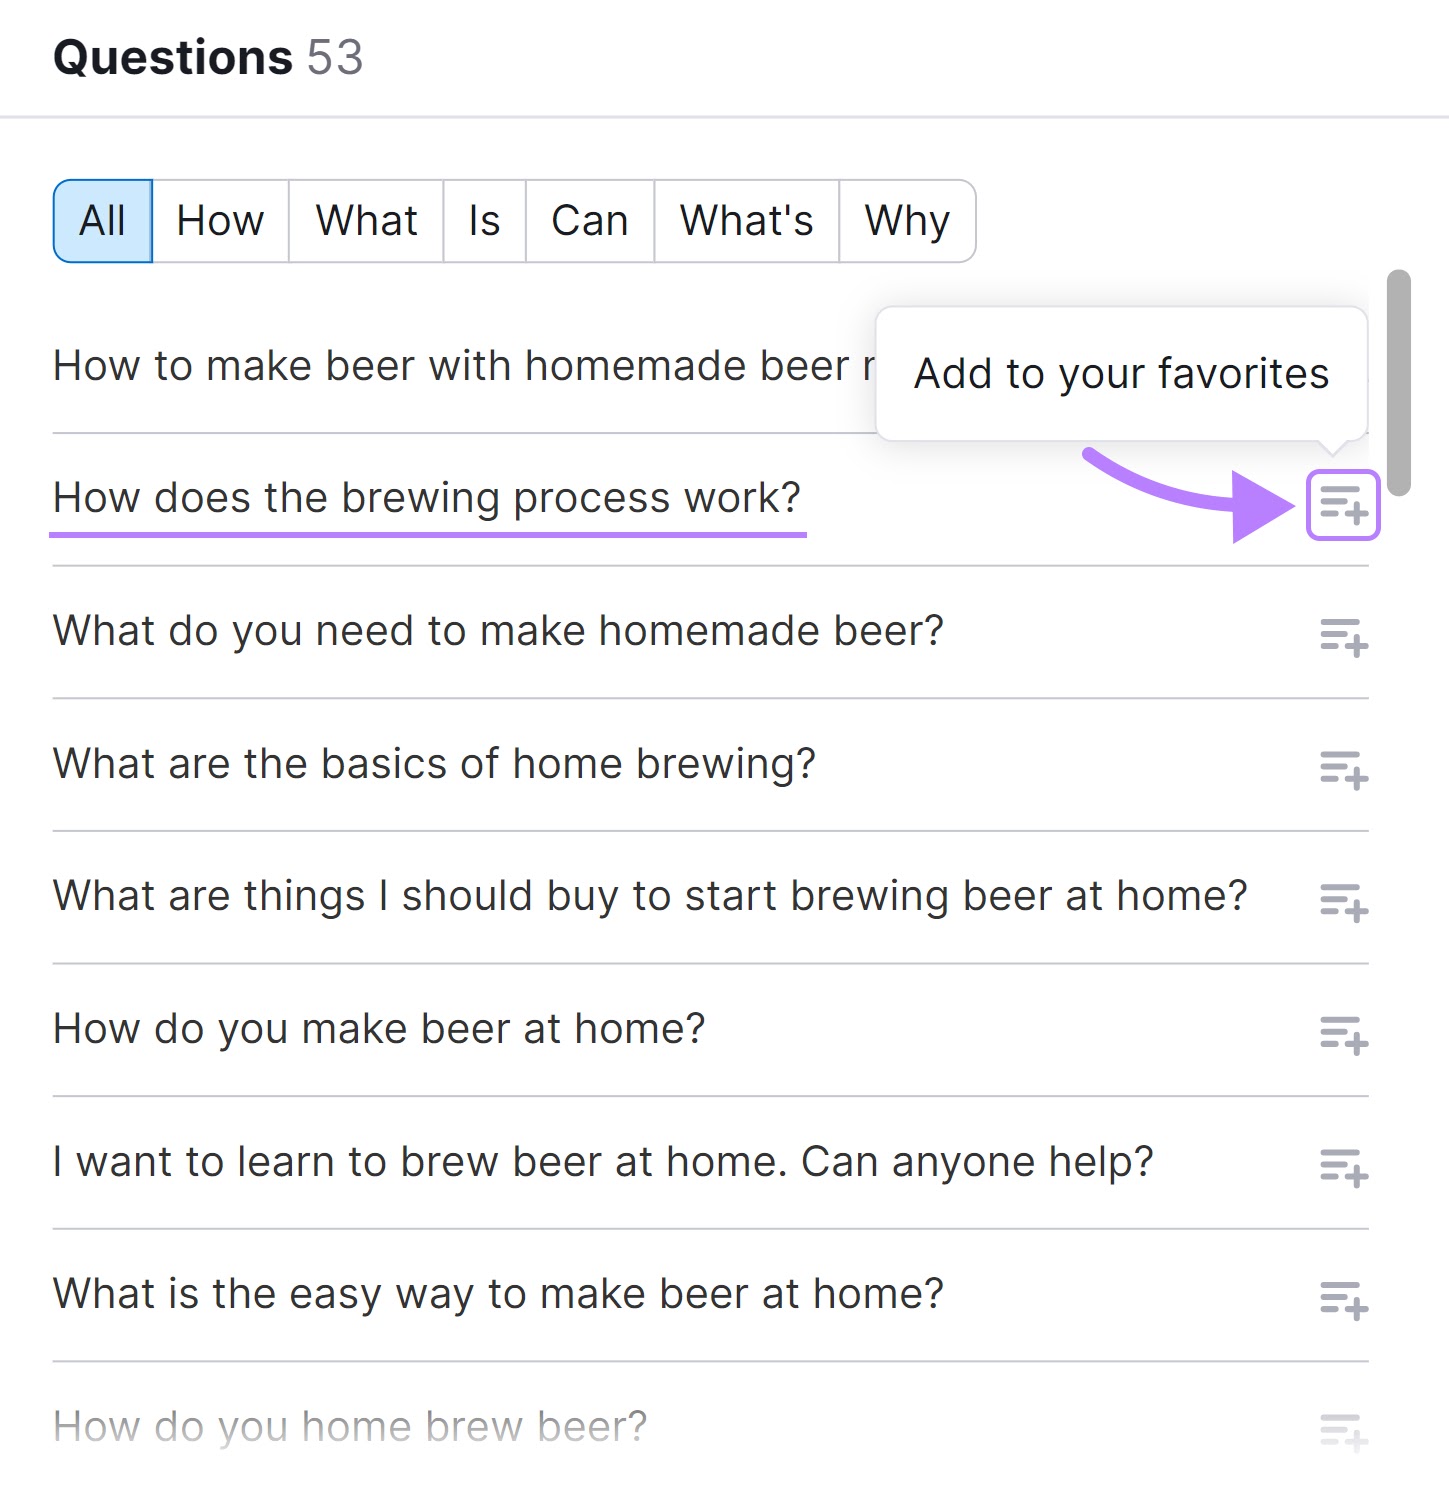 Adding "How does the brewing process work?" idea to favorites